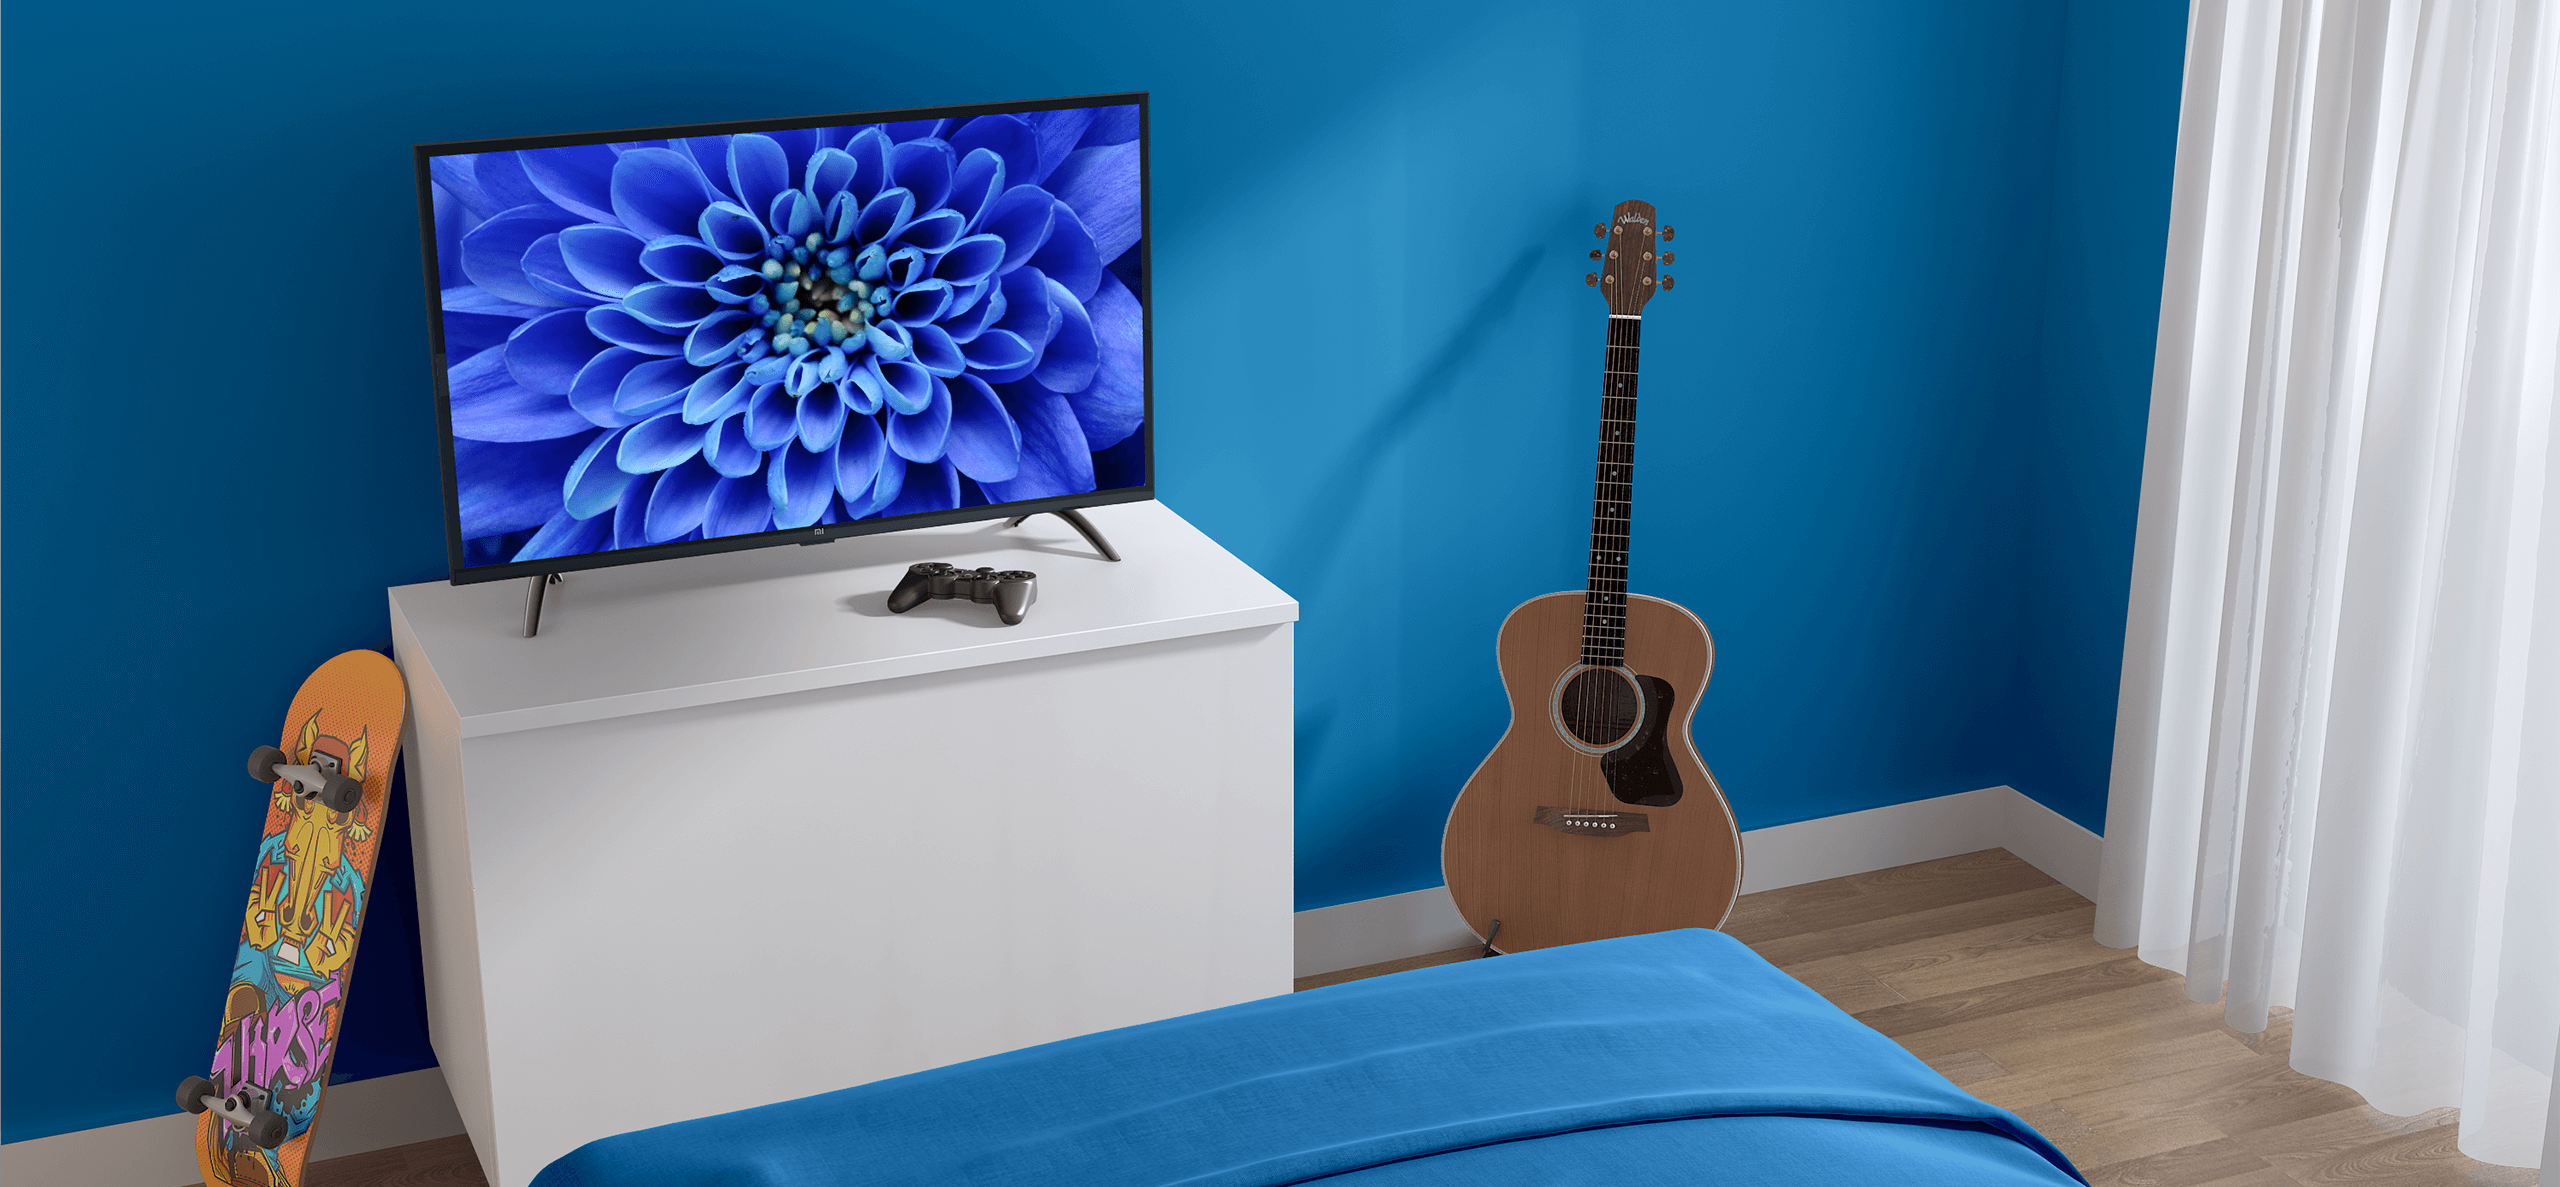 xiaomi-tv-led-4a-android-32